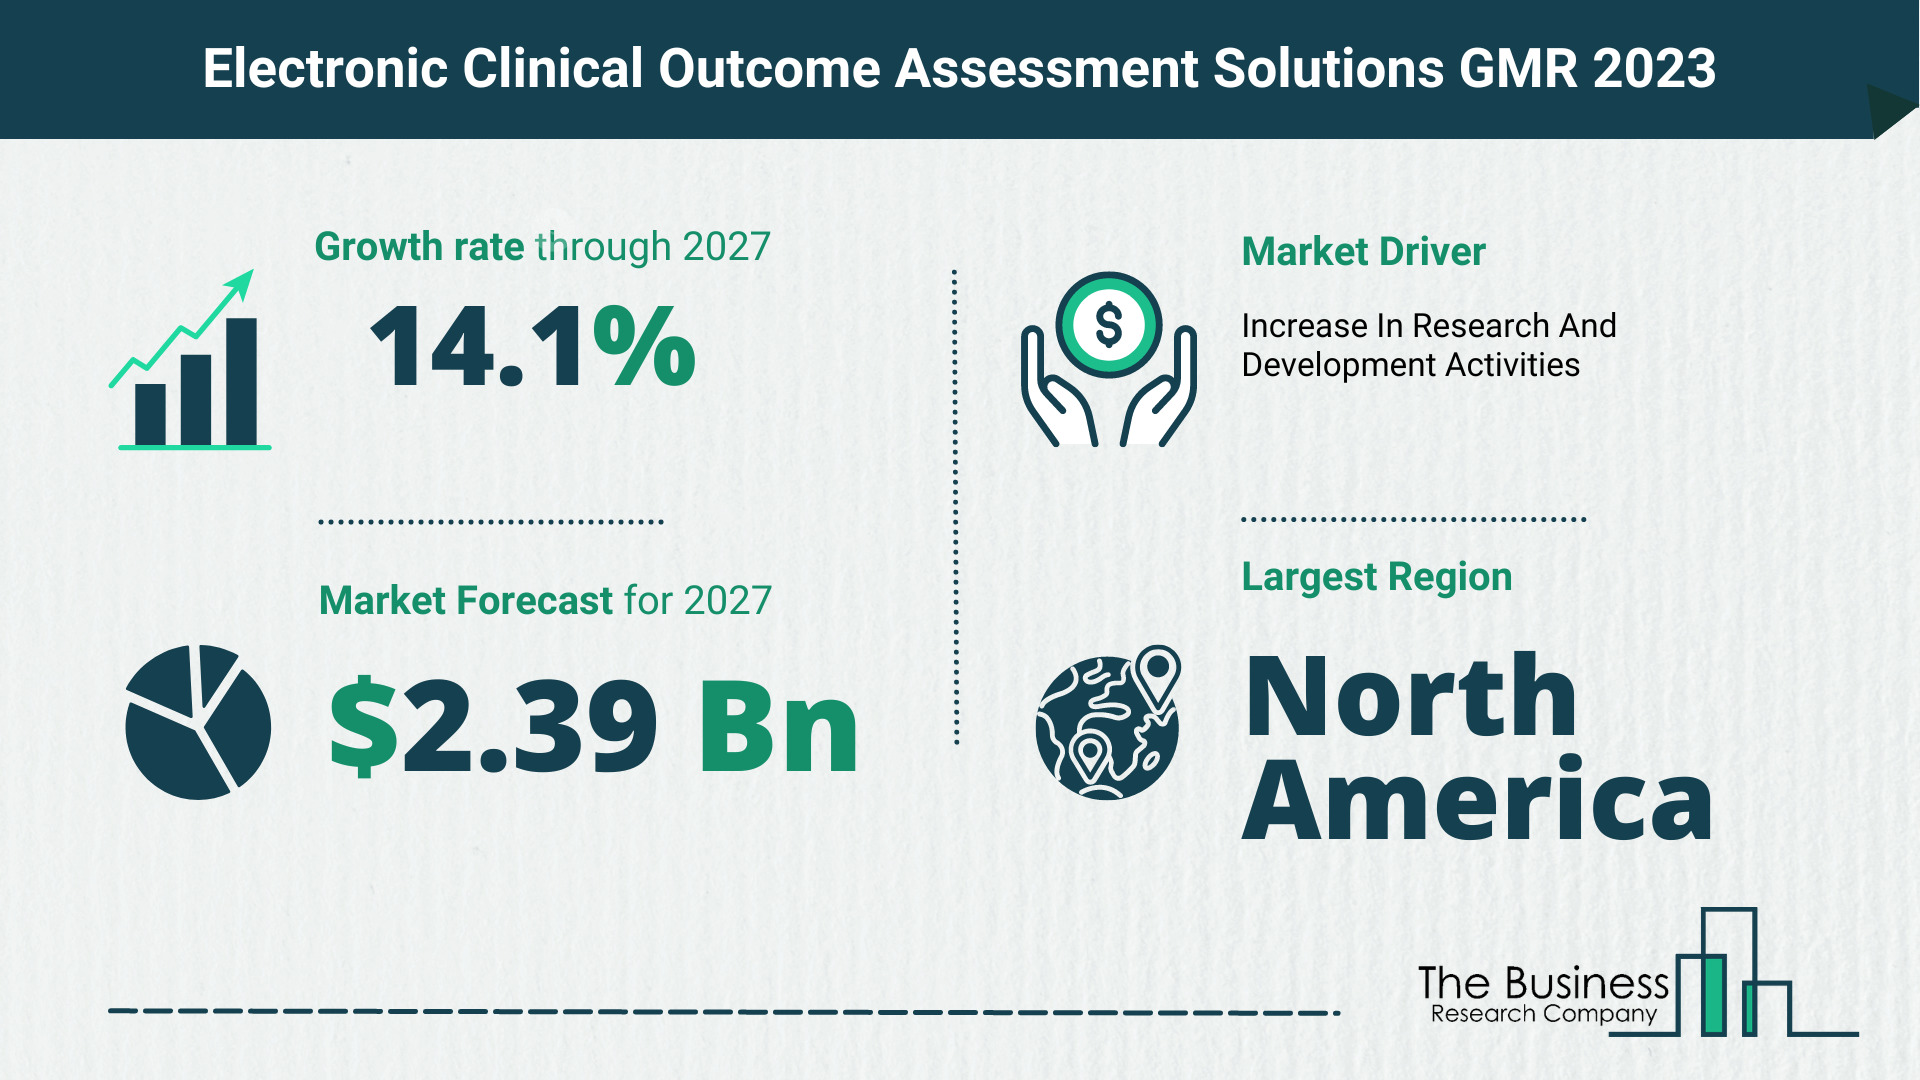 Global Electronic Clinical Outcome Assessment Solutions Market